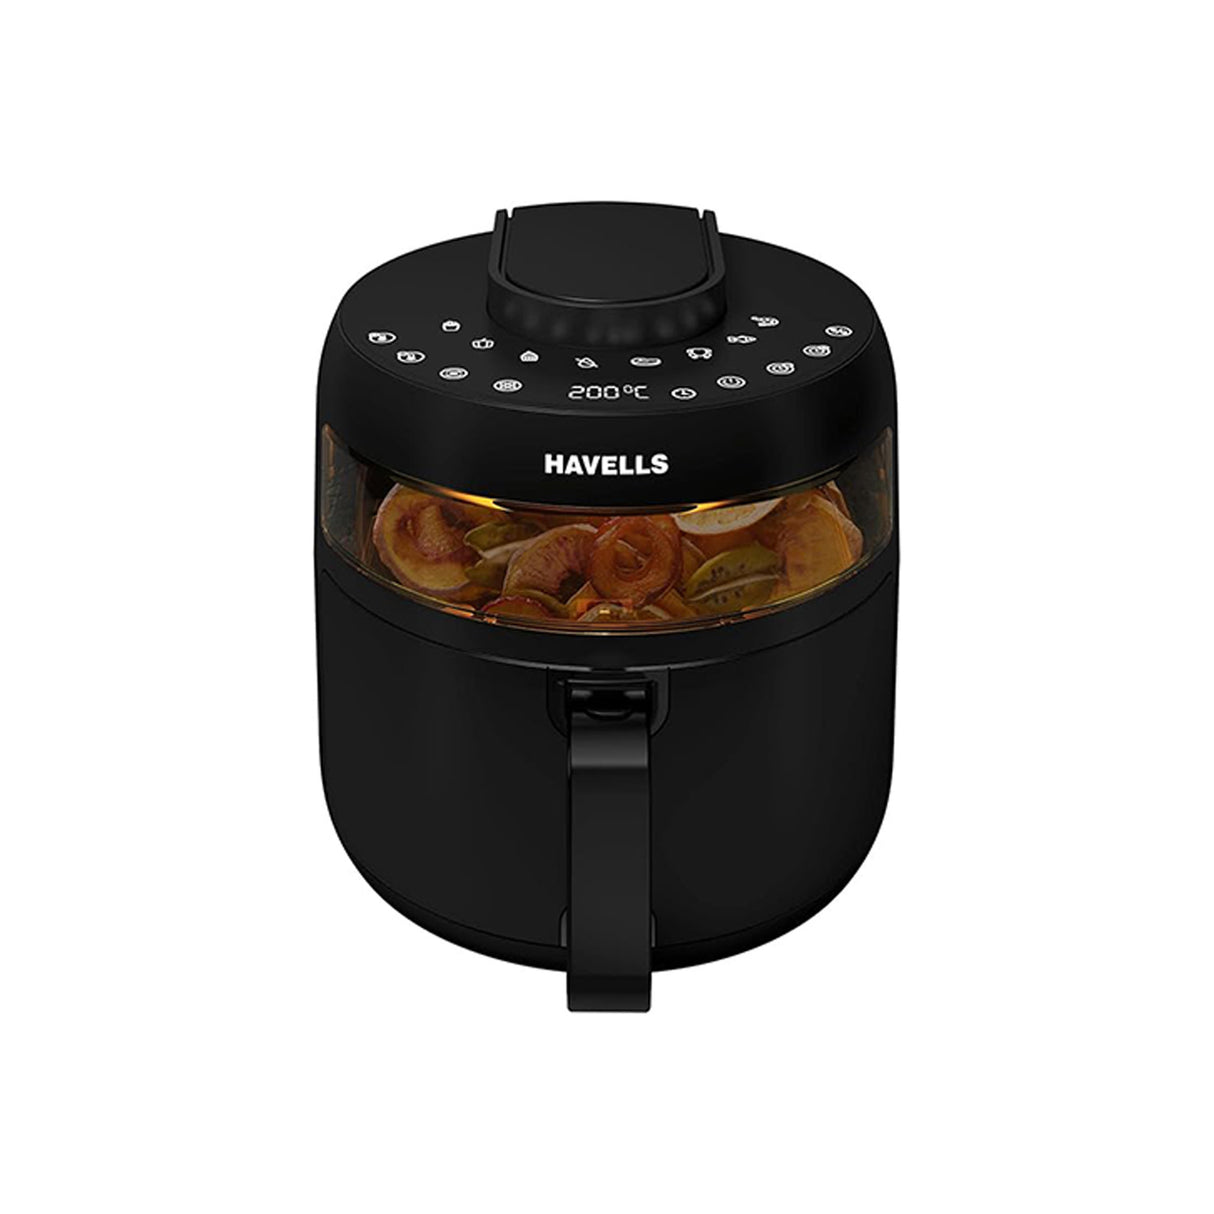 Havells 48L OTG - Black, culinary versatility with rotisserie, convection, and 1800W.